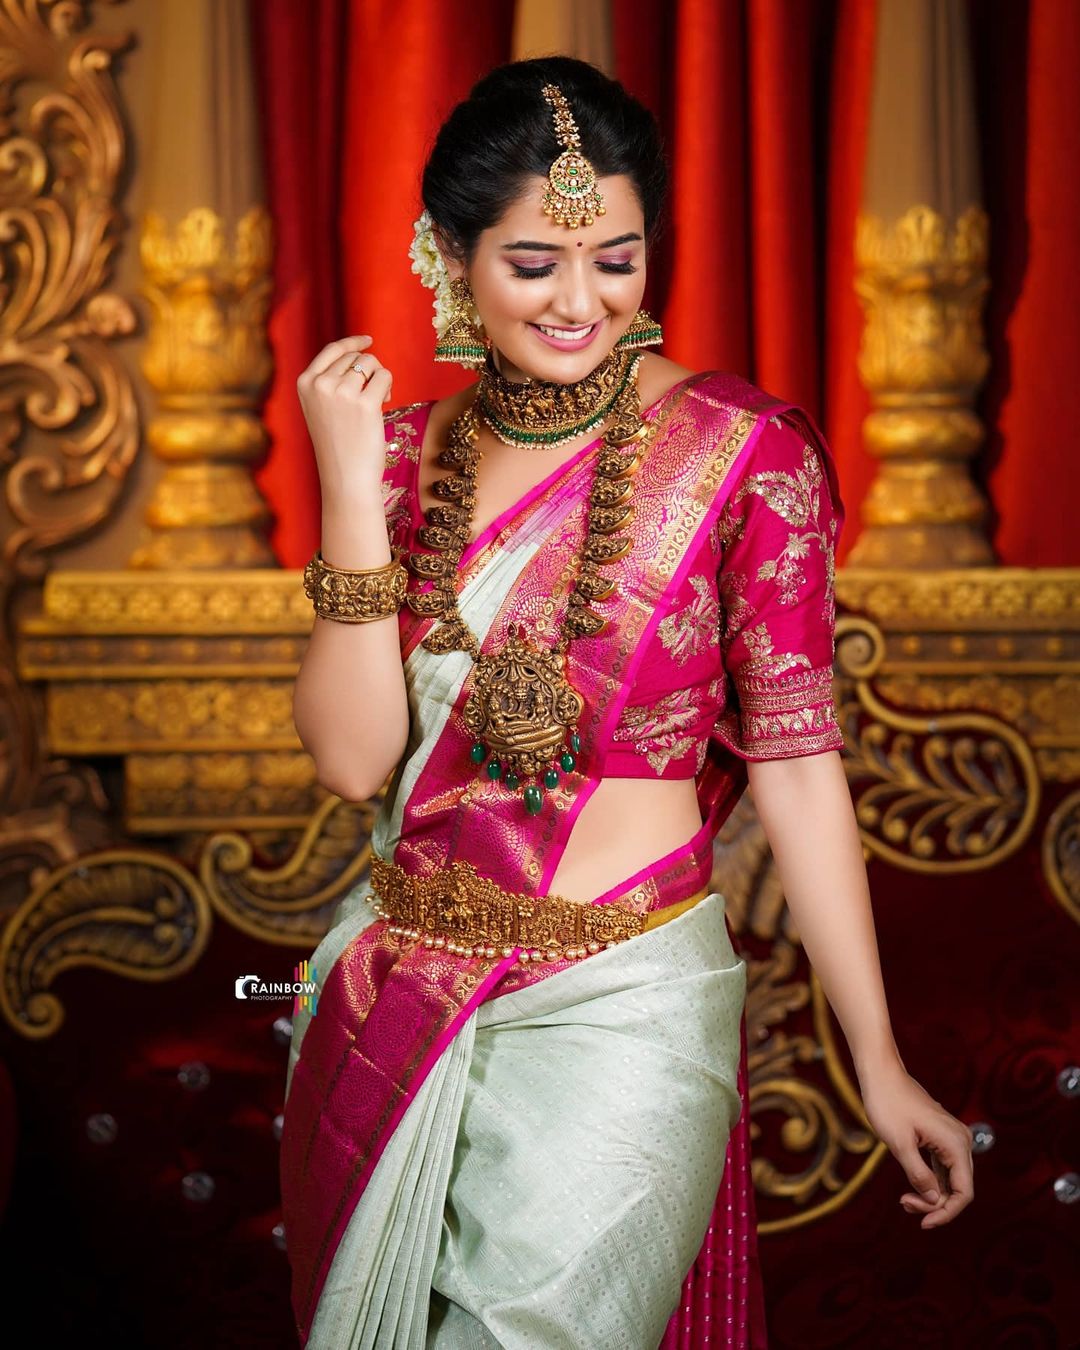 Abilash T A | A traditional kerala bridal look where the bride is adorned  with traditional kerala jewellery and a full south indian bridal makeover.  #... | Instagram